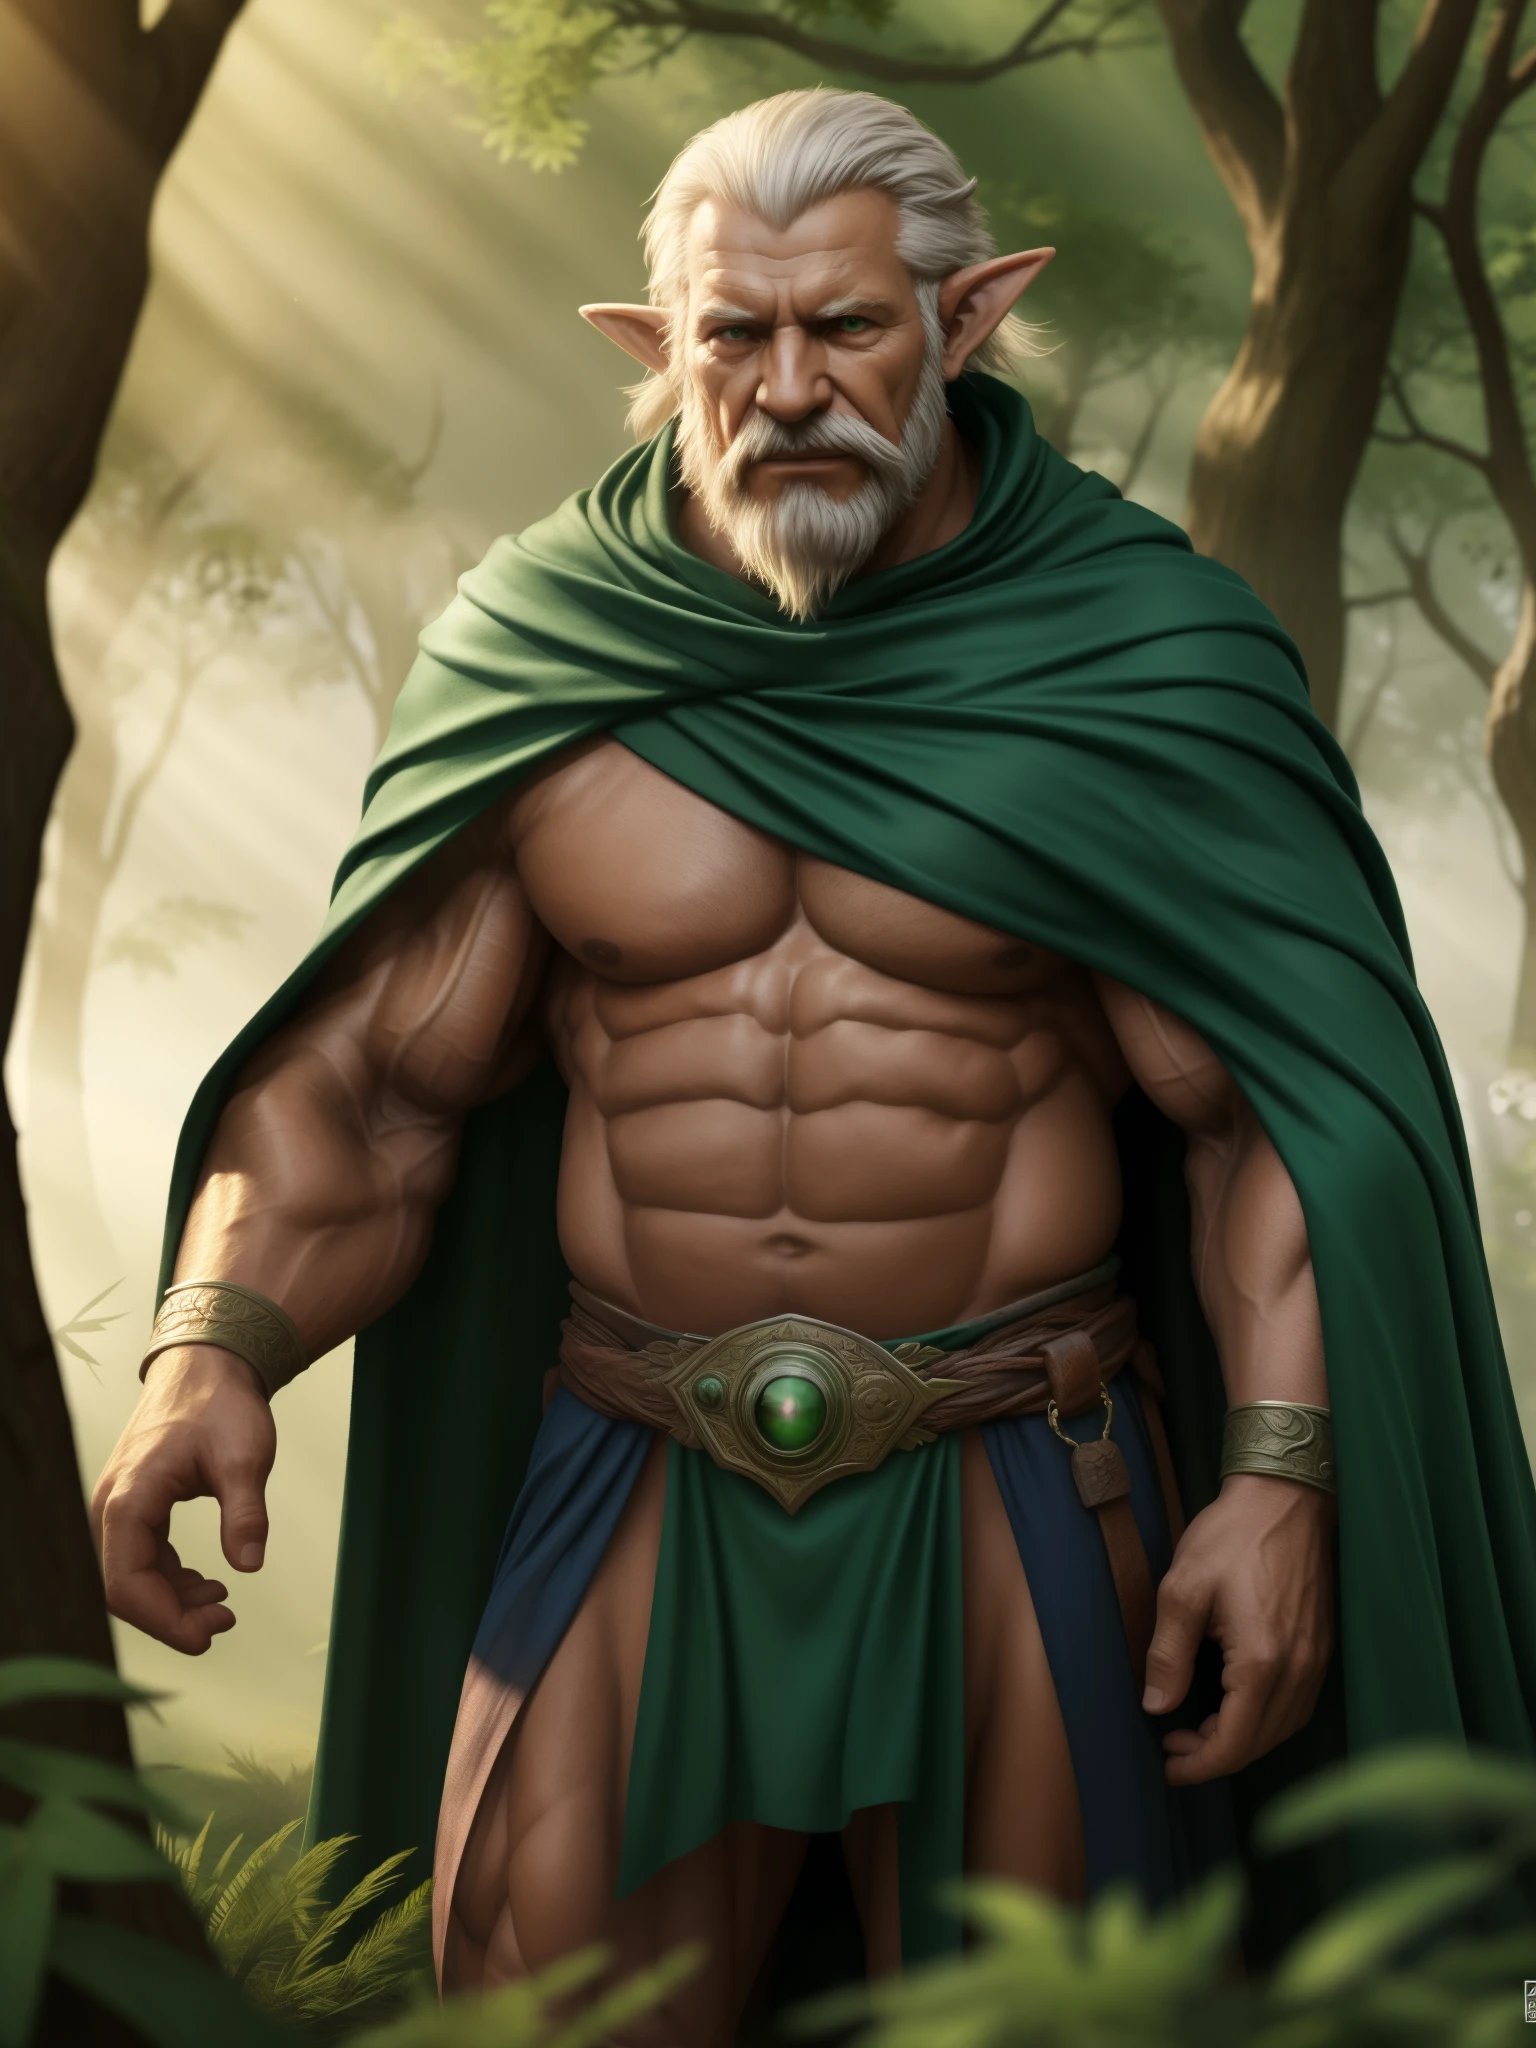 (best quality,4k,8k,highres,masterpiece:1.2),ultra-detailed,(realistic,photorealistic,photo-realistic:1.37),huge muscular elf in ancient forest,old,old man,muscular,[ancient forest],[moss-covered ground],[majestic trees],mysterious fog,AncientElvenArmor,enchanted glowing sword,aged face with long white beard and wrinkles,wisdom in the eyes,serene expression,cape flowing in the wind,sunlight filtering through the branches,evokes a sense of magic and tranquility,portraits,green color palette,soft lighting